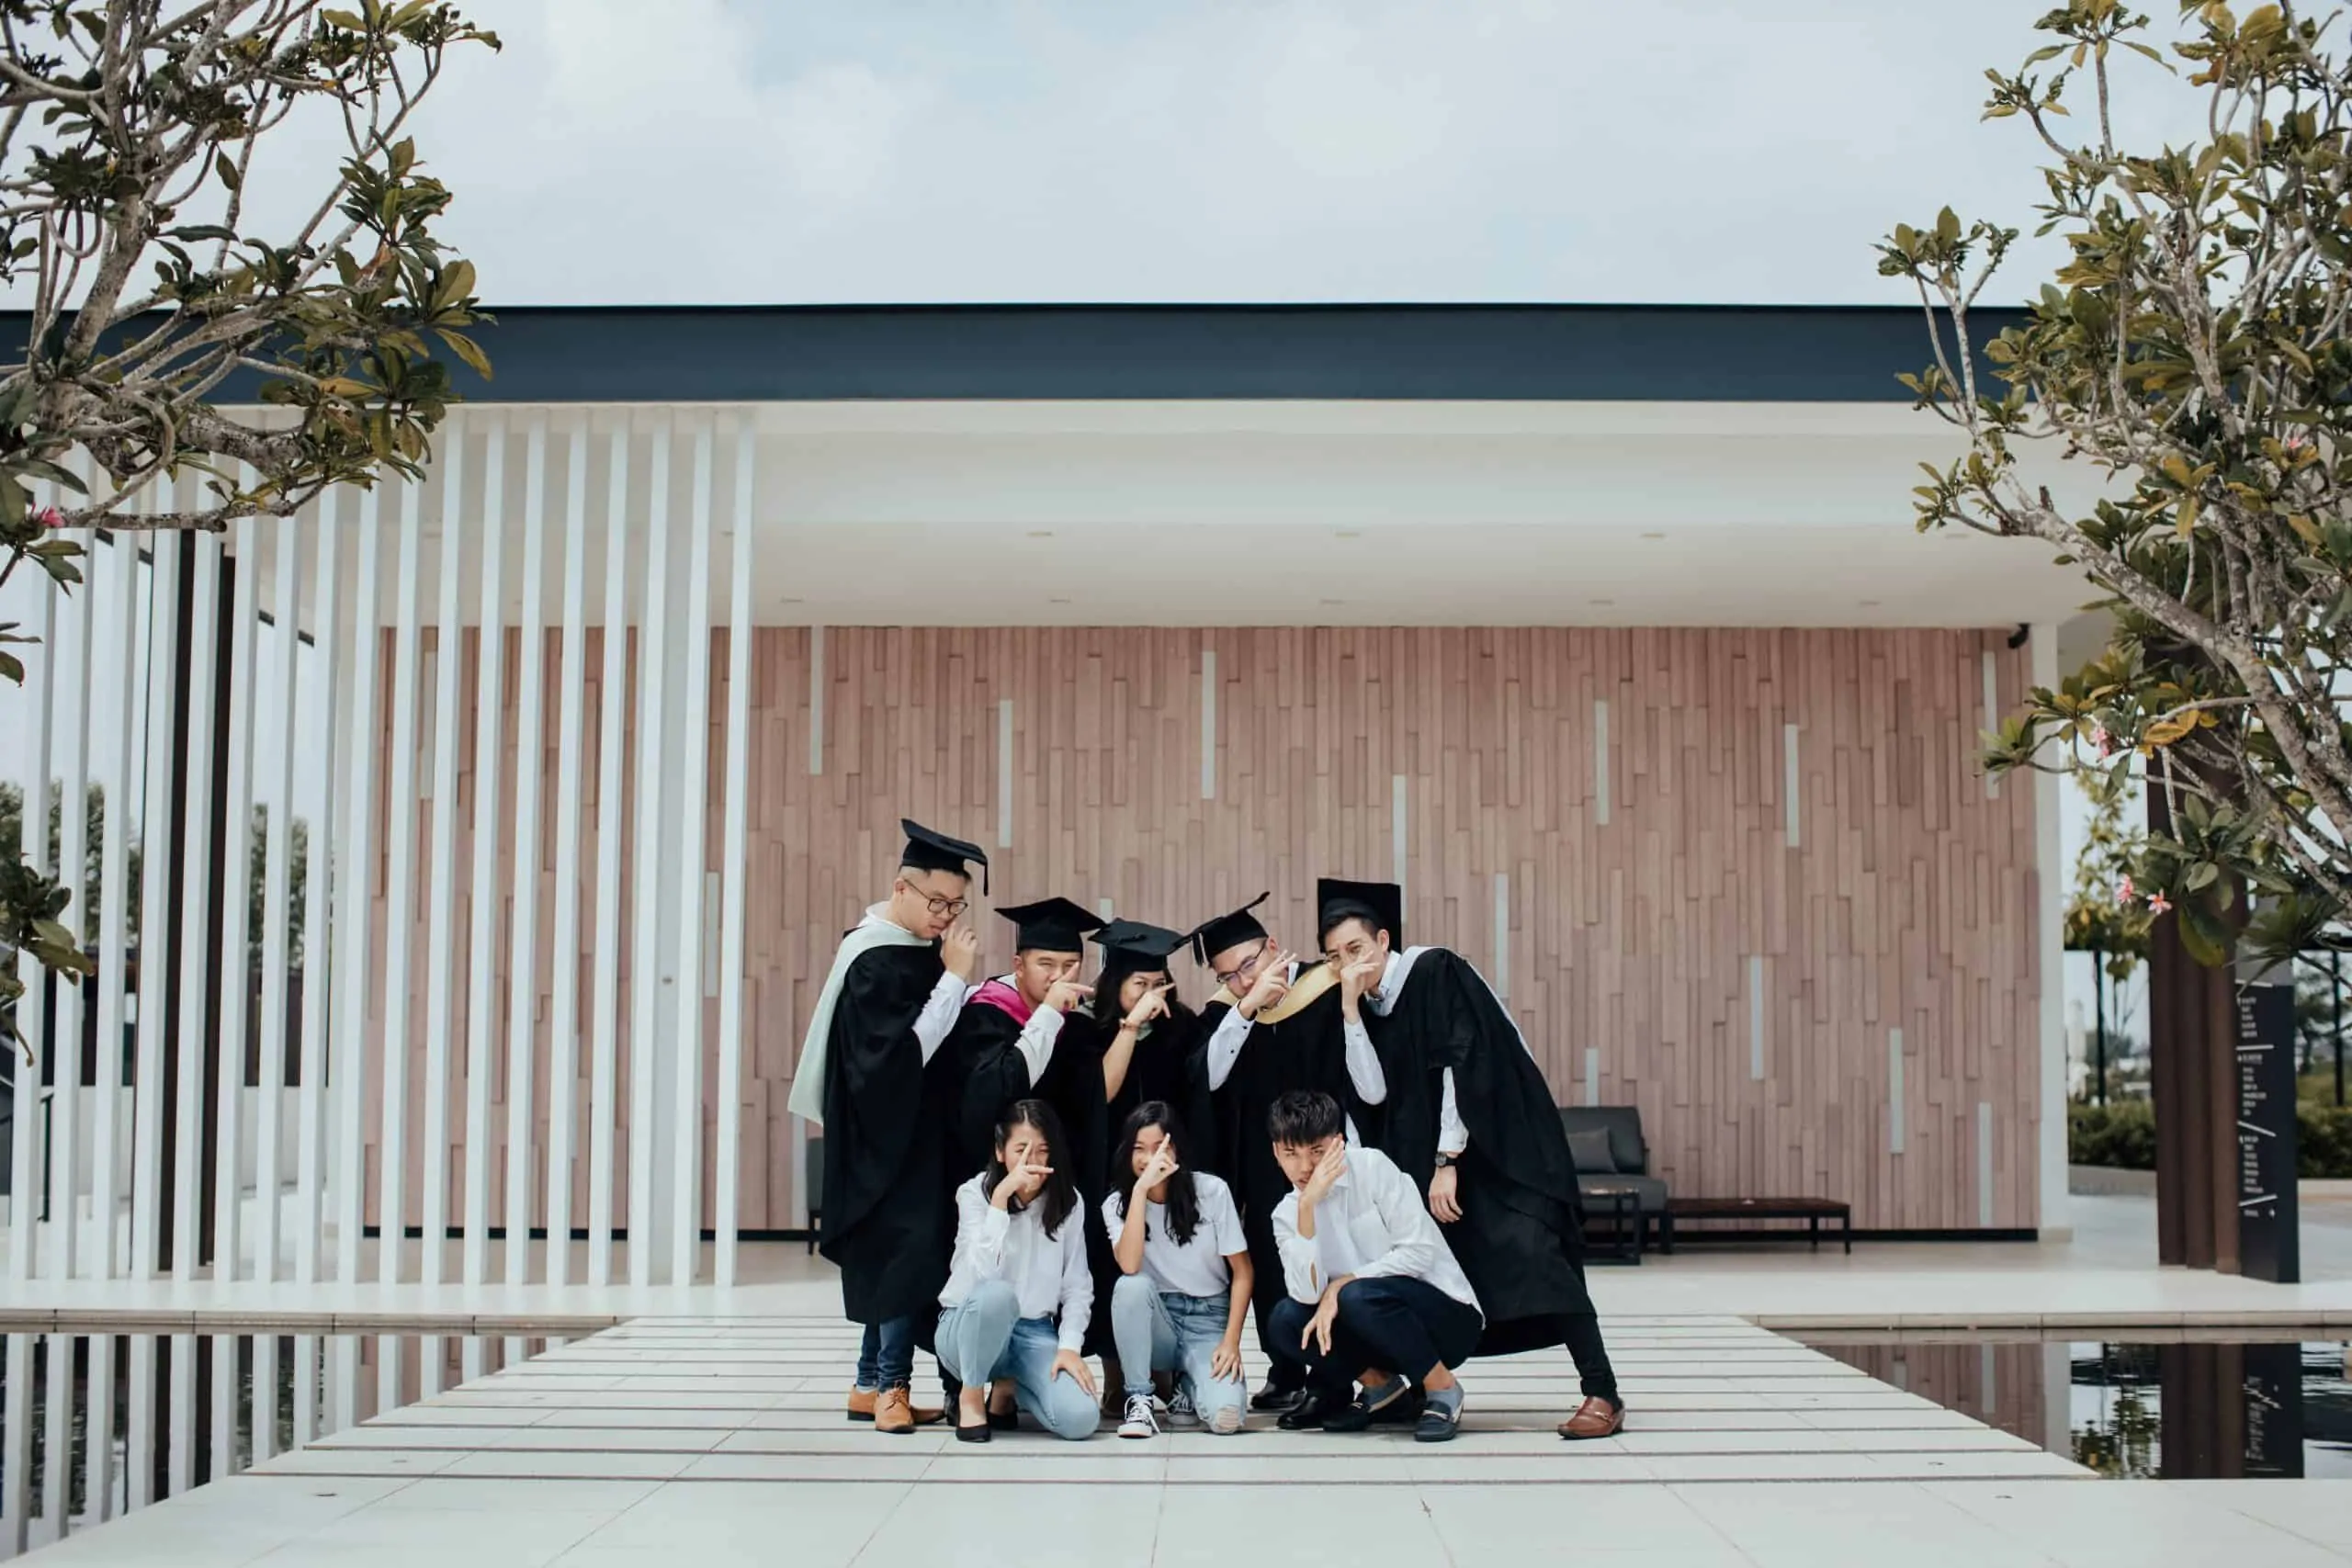 Kuala Lumpur Outdoor Casual Leisure Happy Family and post-graduation Portrait Sesson